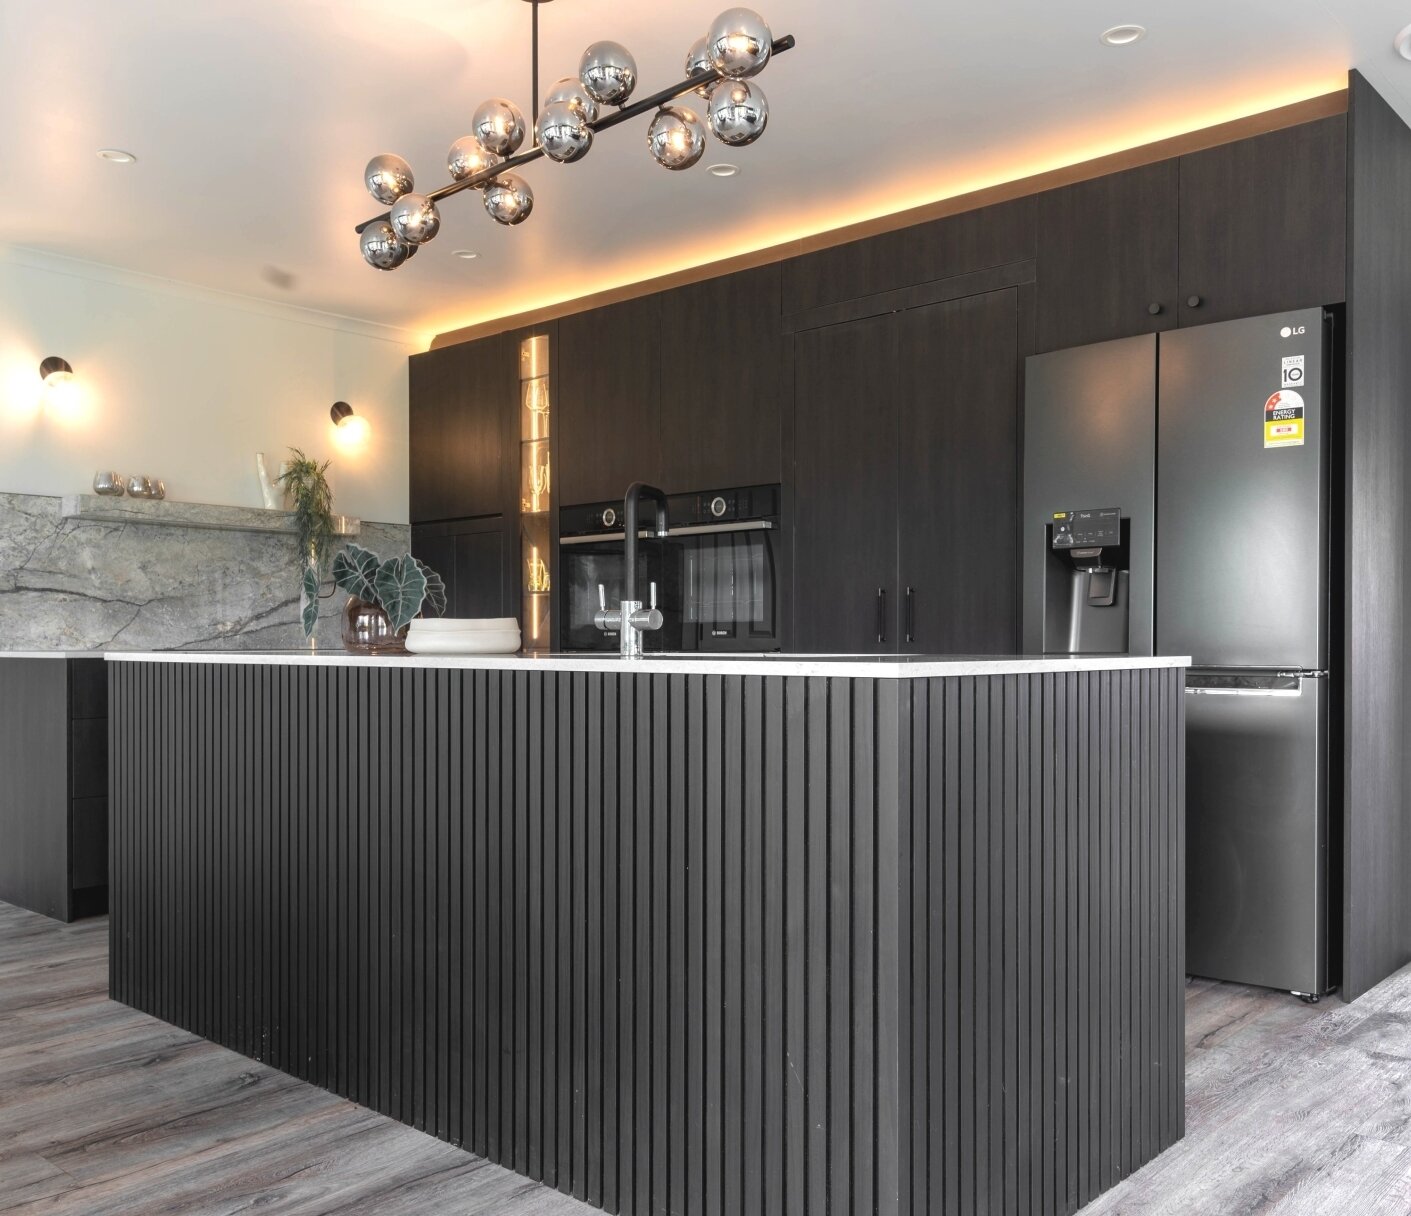 ✨ Kitchen Reveal! ✨

Step into a world where moody elegance meets modern sophistication. This warm black kitchen creates a subtle yet luxurious ambiance that's simply perfect for entertaining.

✨ Features: hidden pantry,  Ceasarstone benchtop, elegan